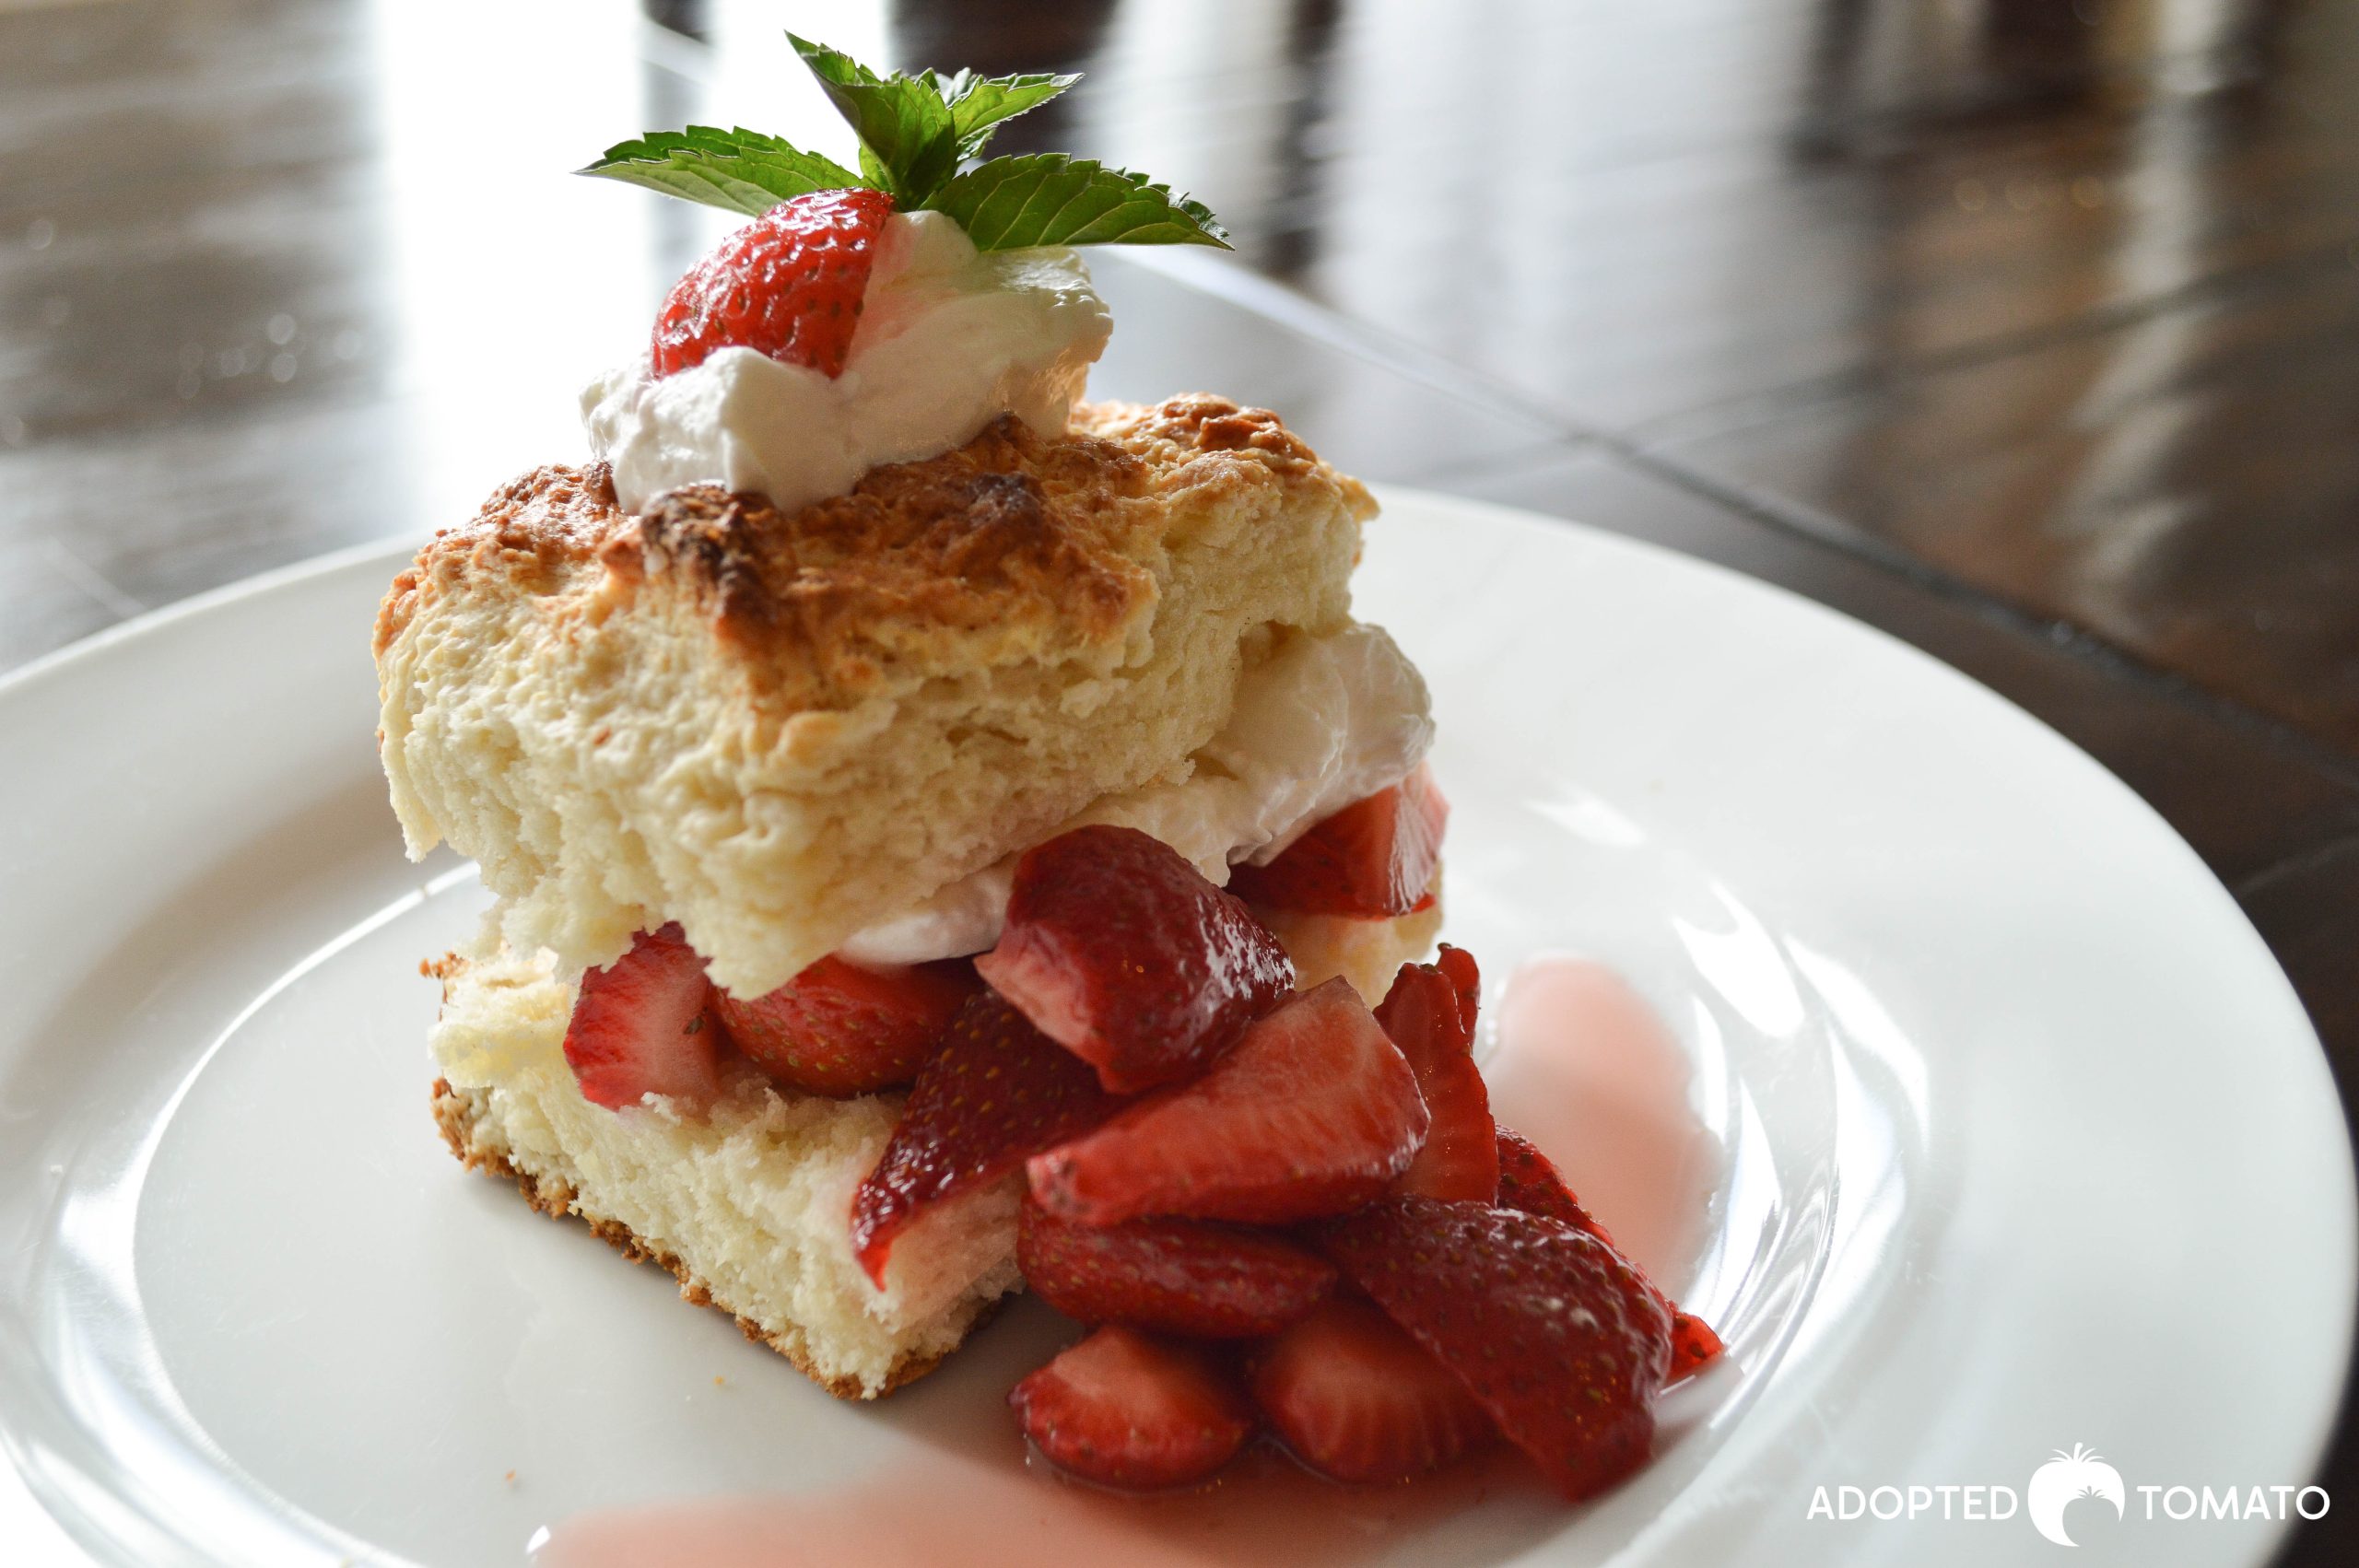 STRAWBERRY SHORTCAKE WITH HOMEMADE BISCUITS